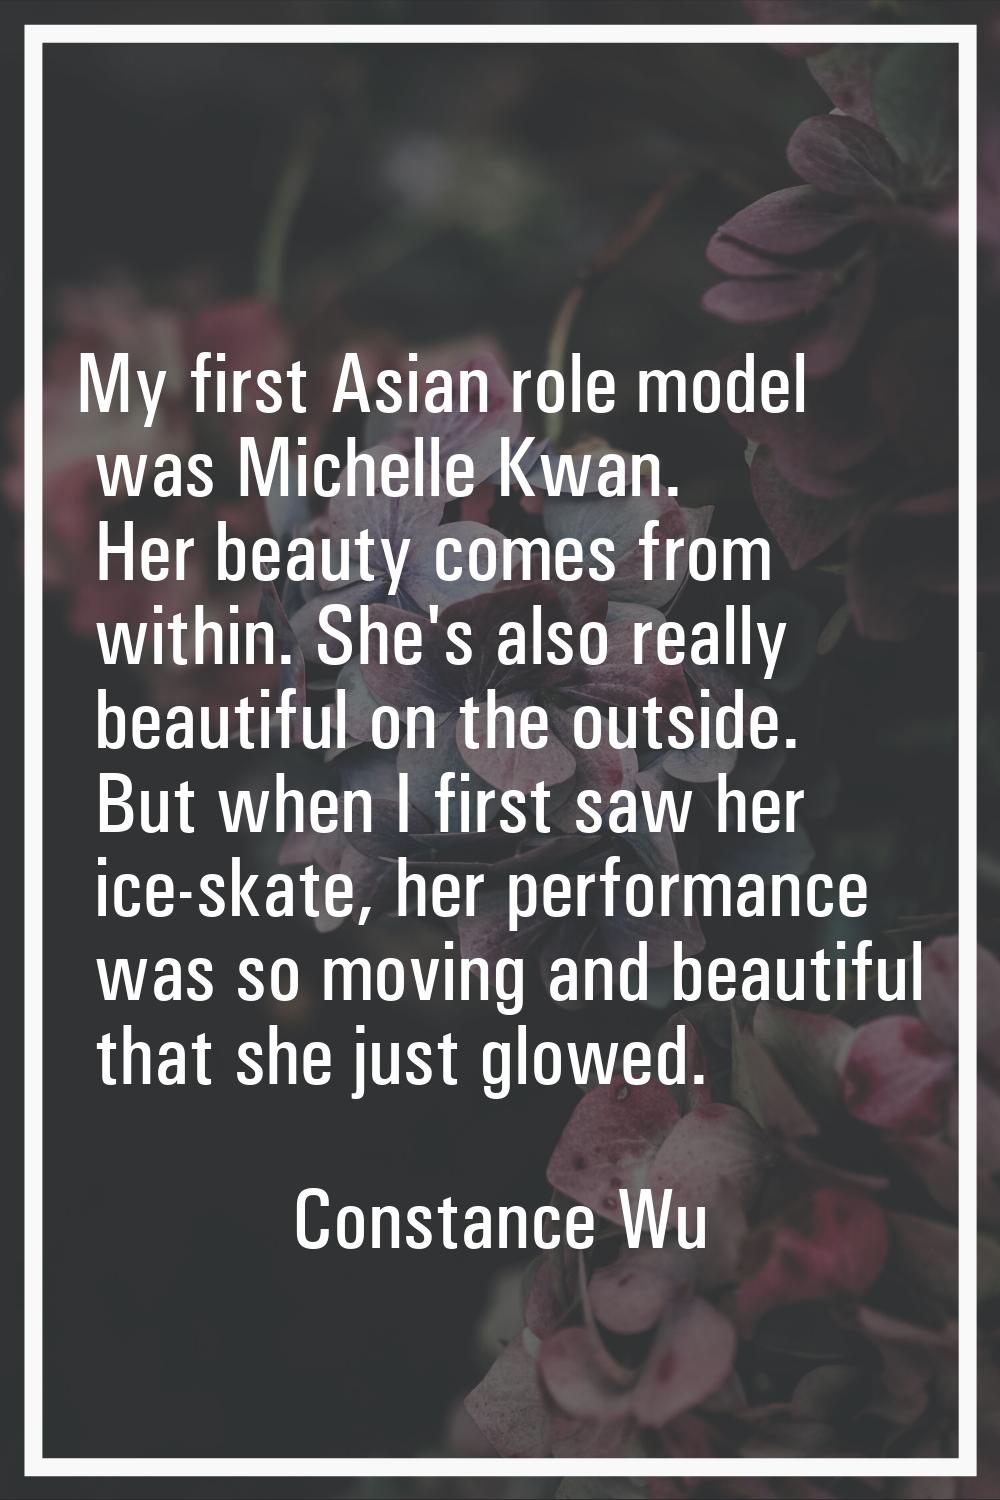 My first Asian role model was Michelle Kwan. Her beauty comes from within. She's also really beauti